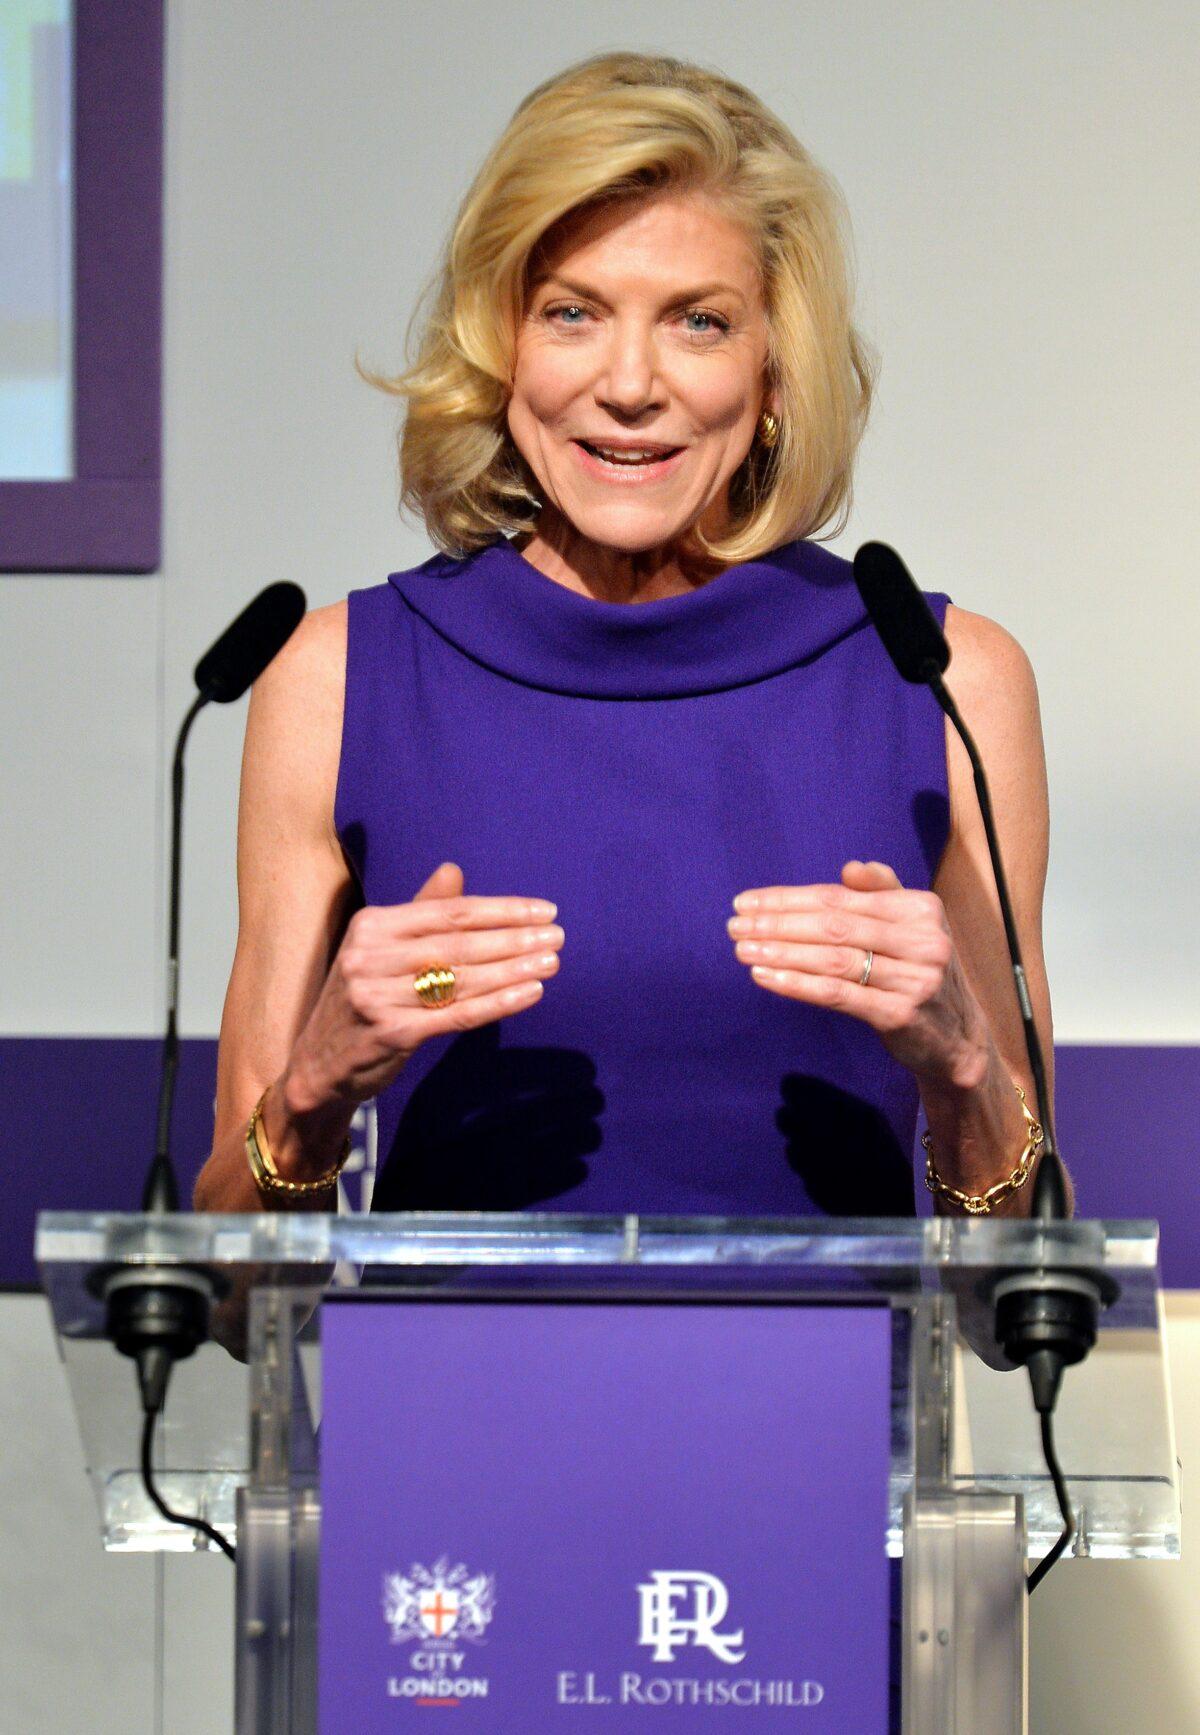 Lynn Forester de Rothschild addresses the Inclusive Capitalism Conference in London, on May 27, 2014. (John Stillwell/AFP via Getty Images)